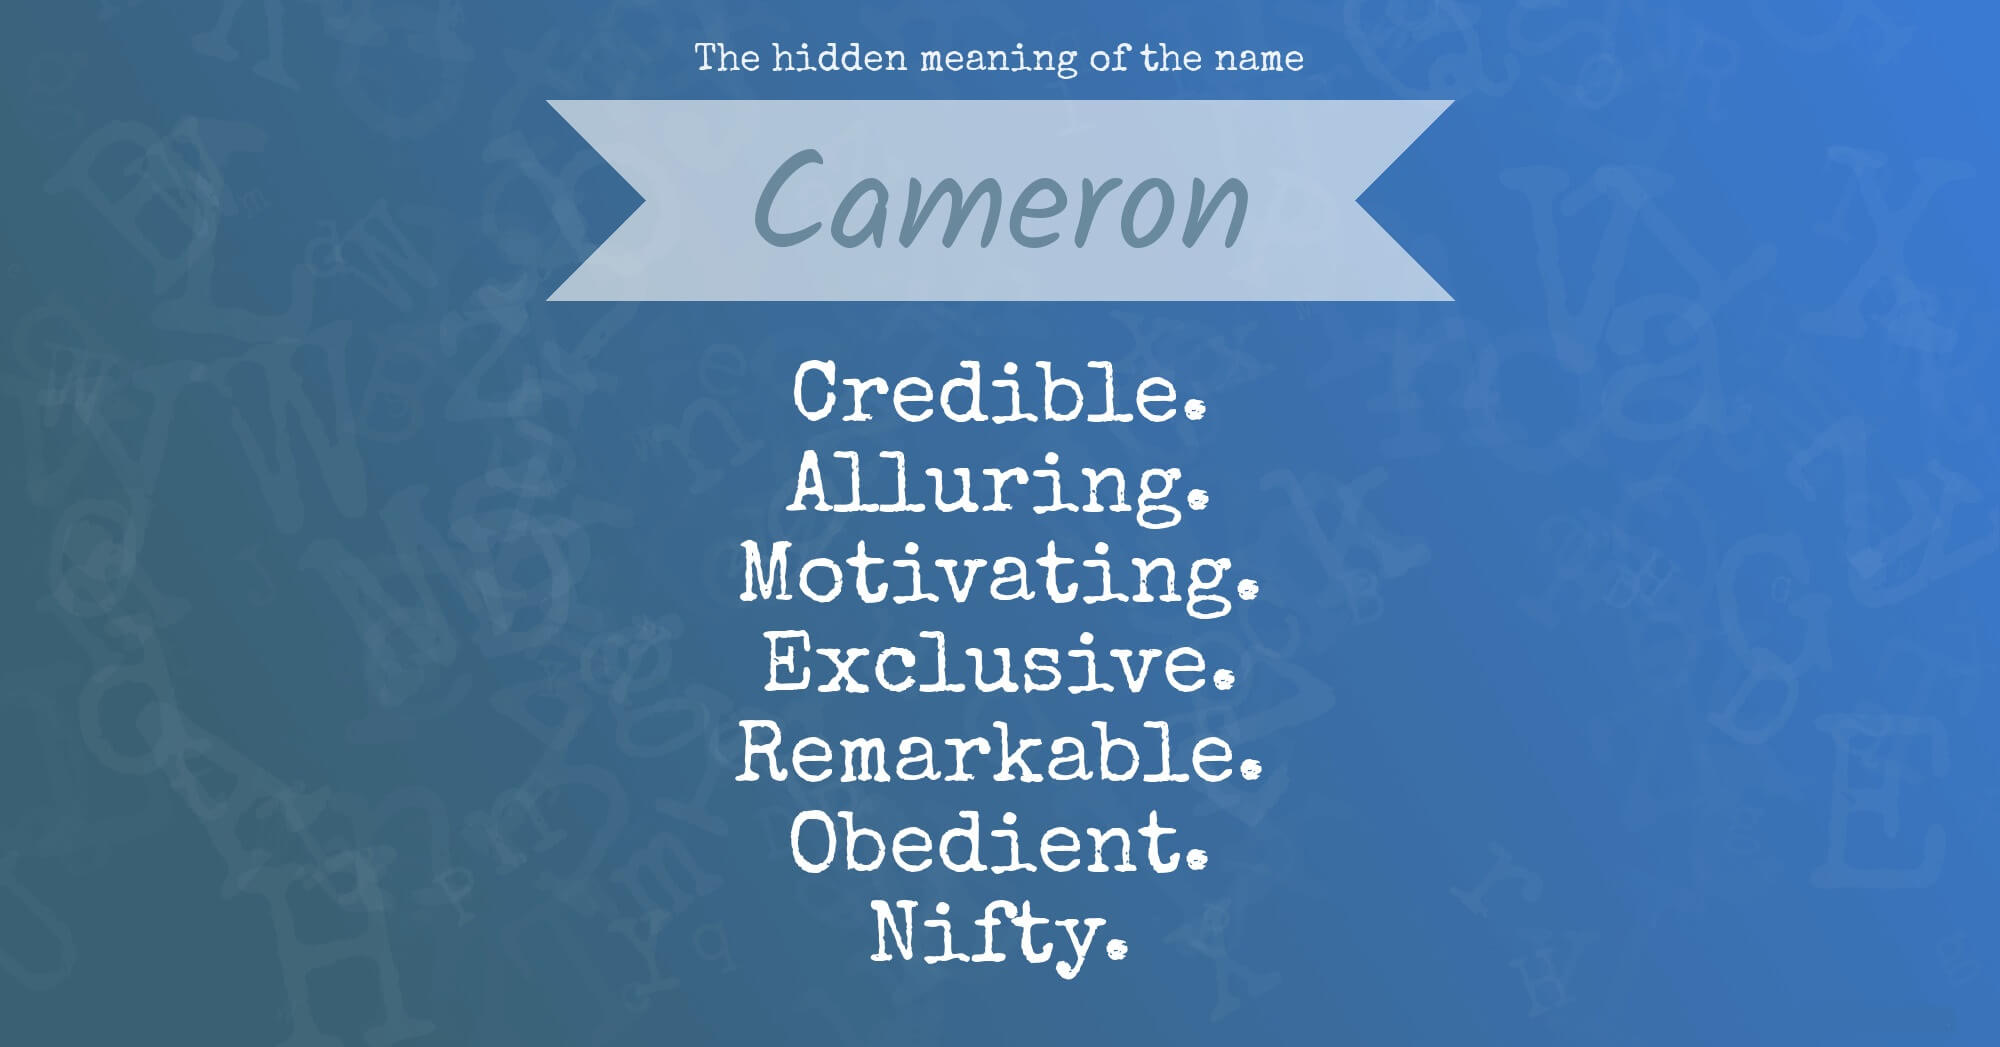 The Hidden Meaning of The Name Cameron